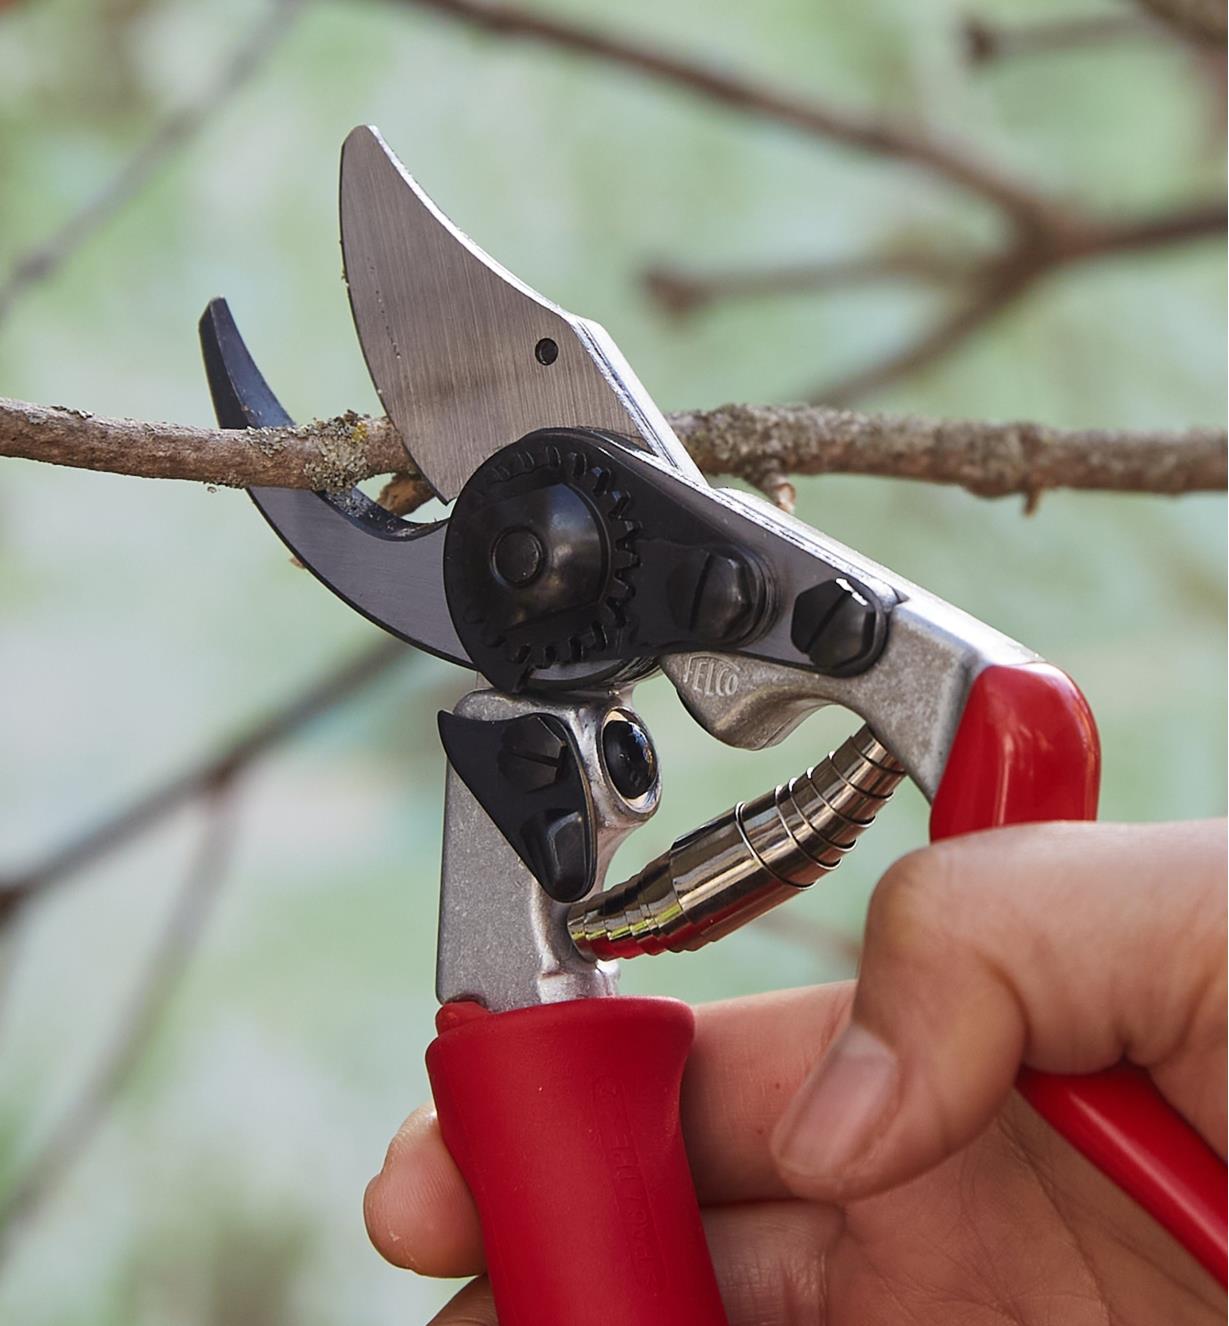 Using the Felco #15 pruner to cut a branch